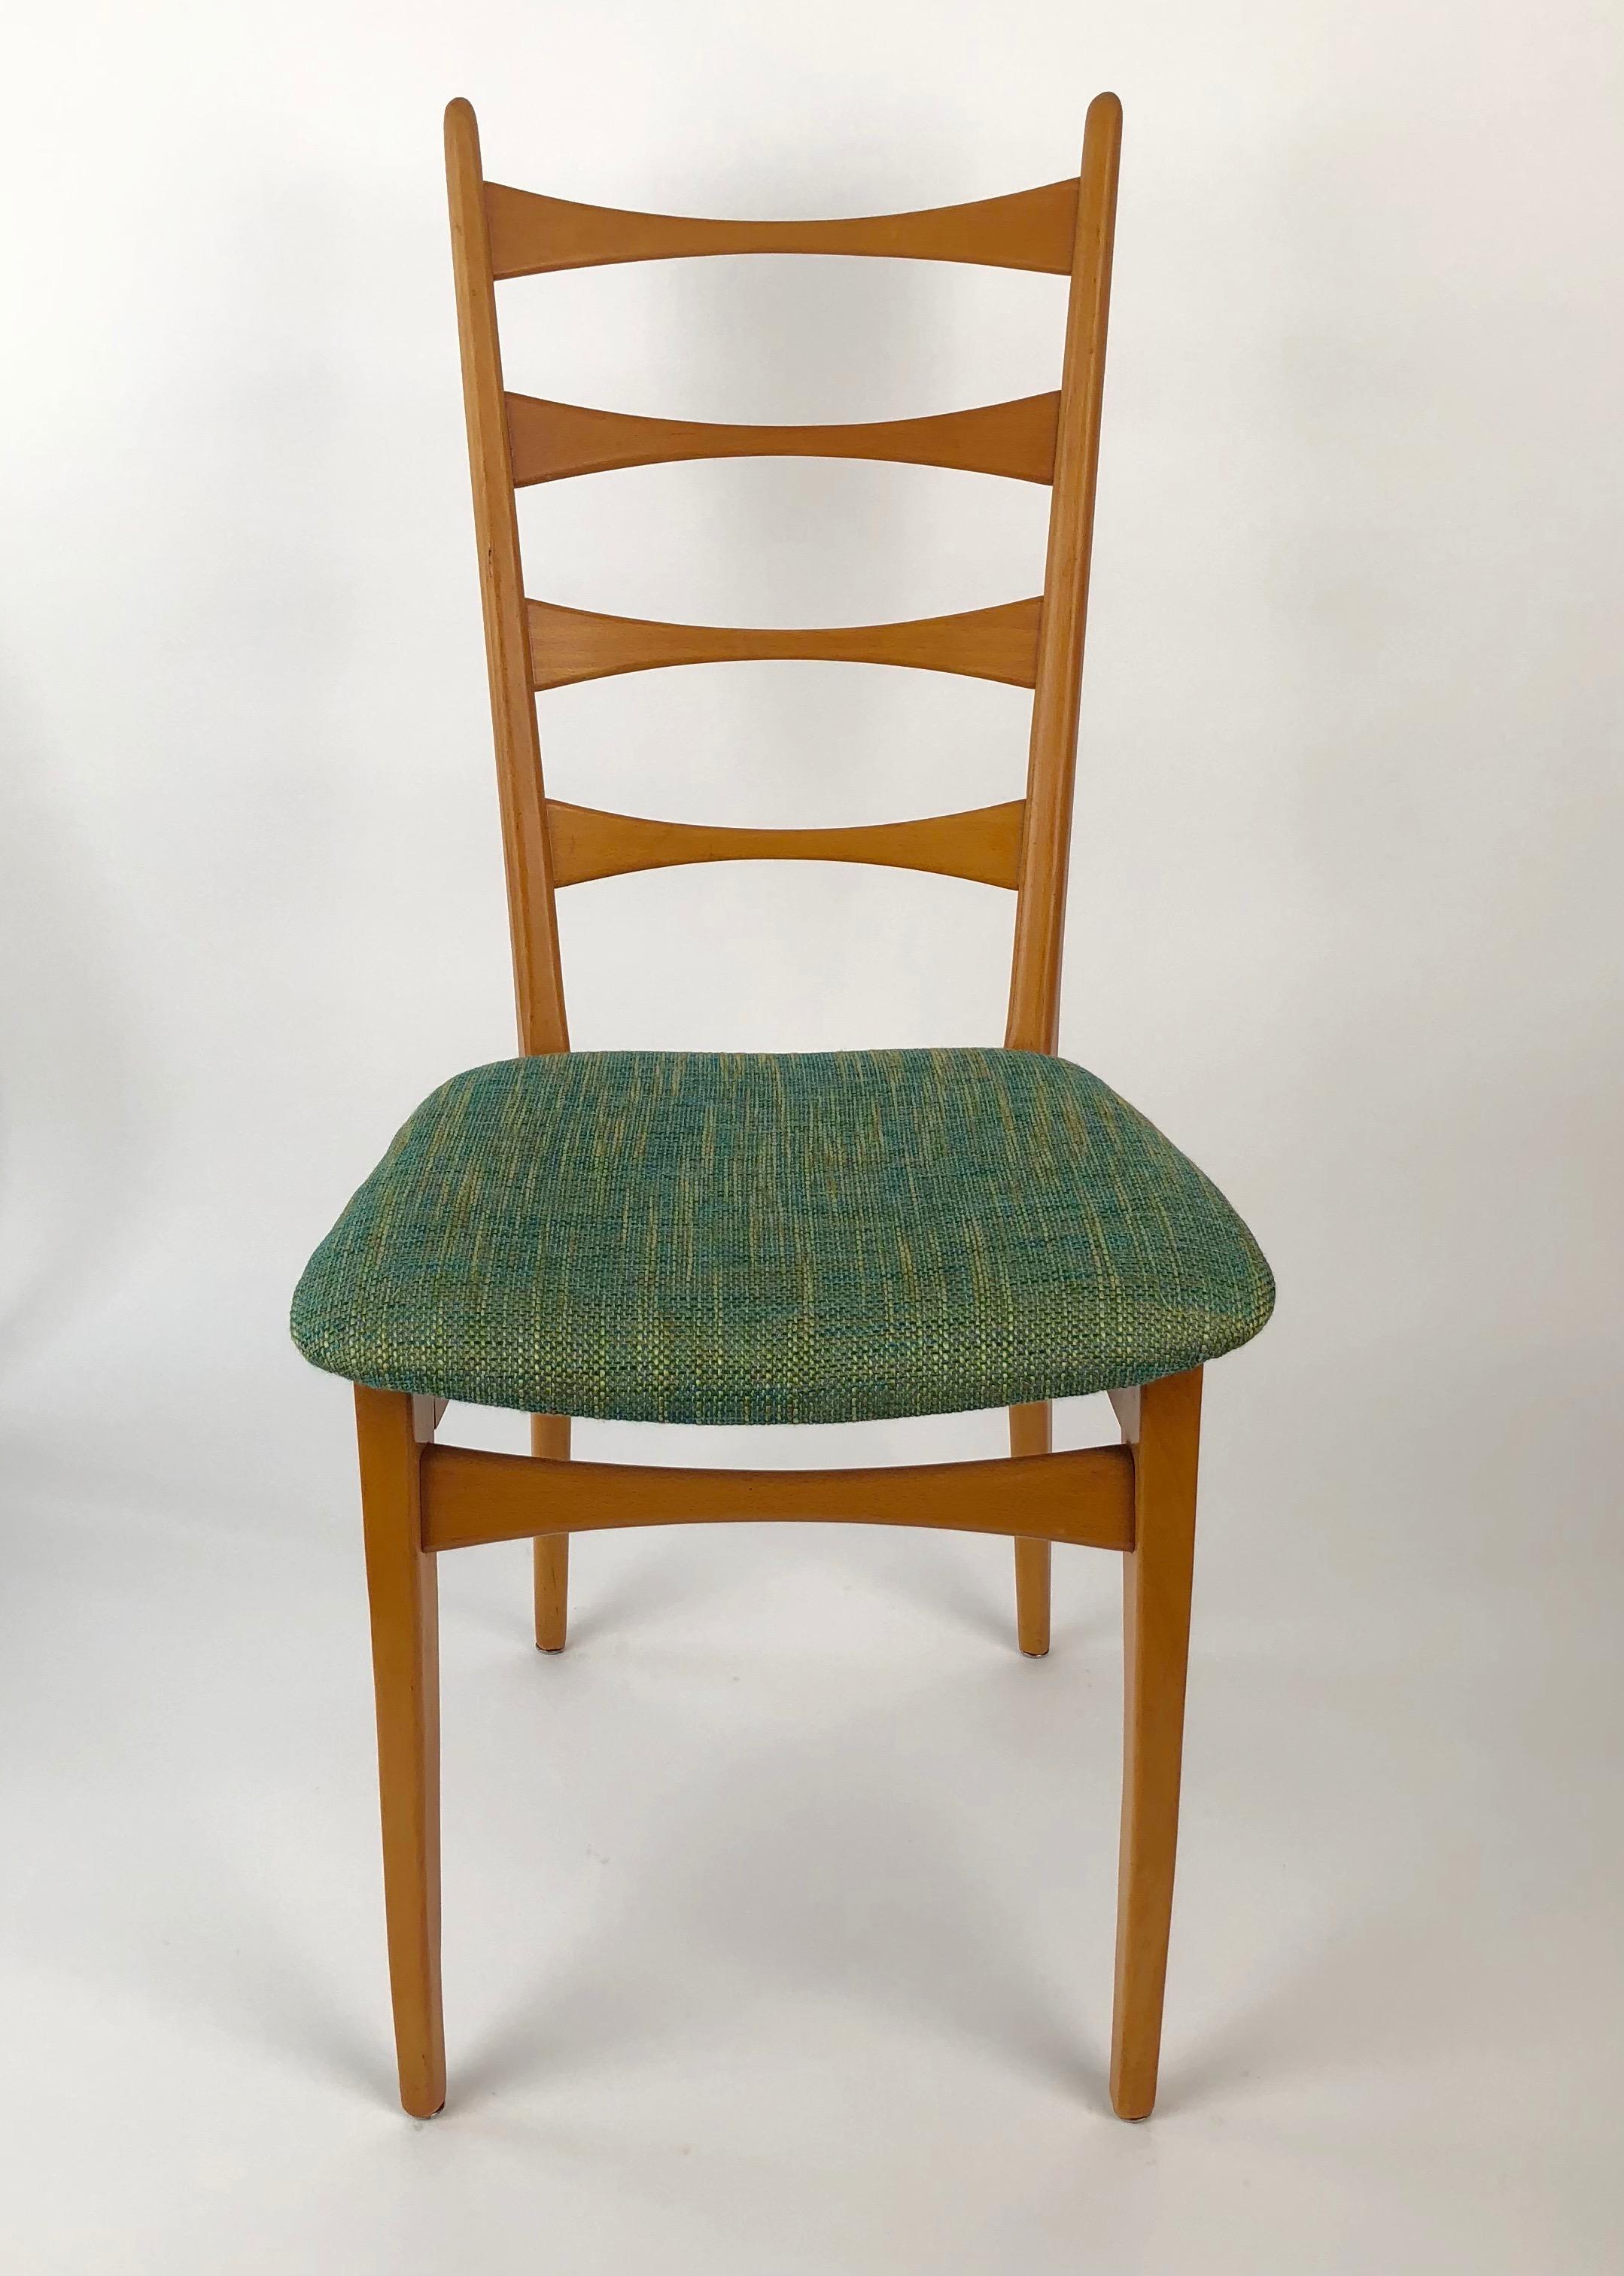 Six Danish Modern Midcentury Ladder Back Dinning Chairs For Sale 6